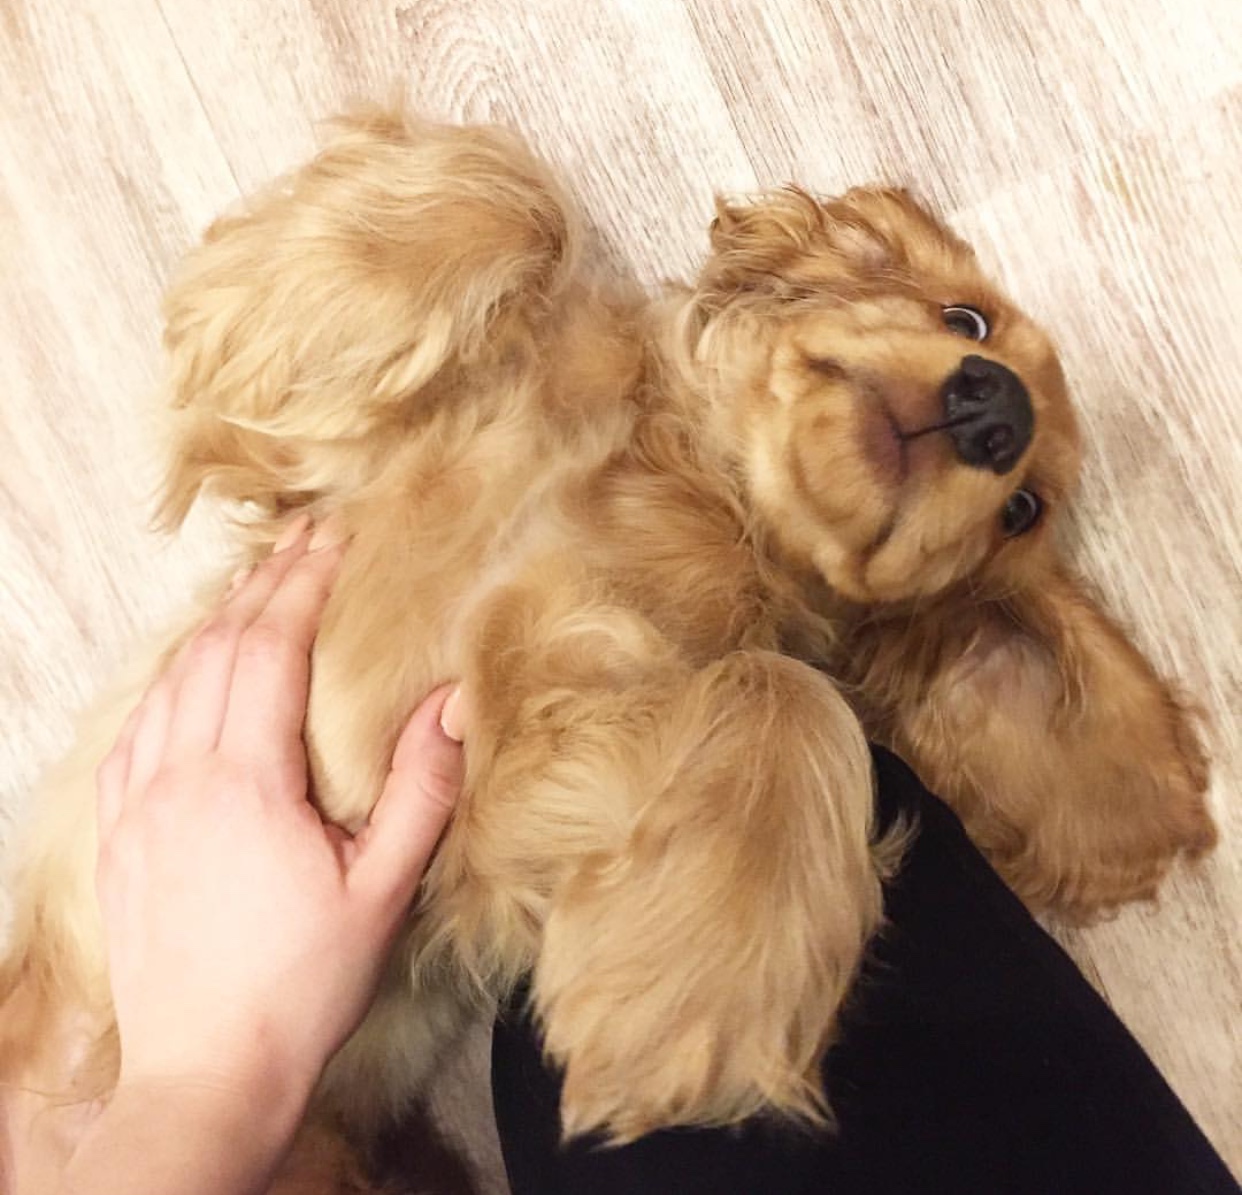 A English Cocker Spaniel puppy lying on the floor while getting belly rubs from a woman kneeling on the floor